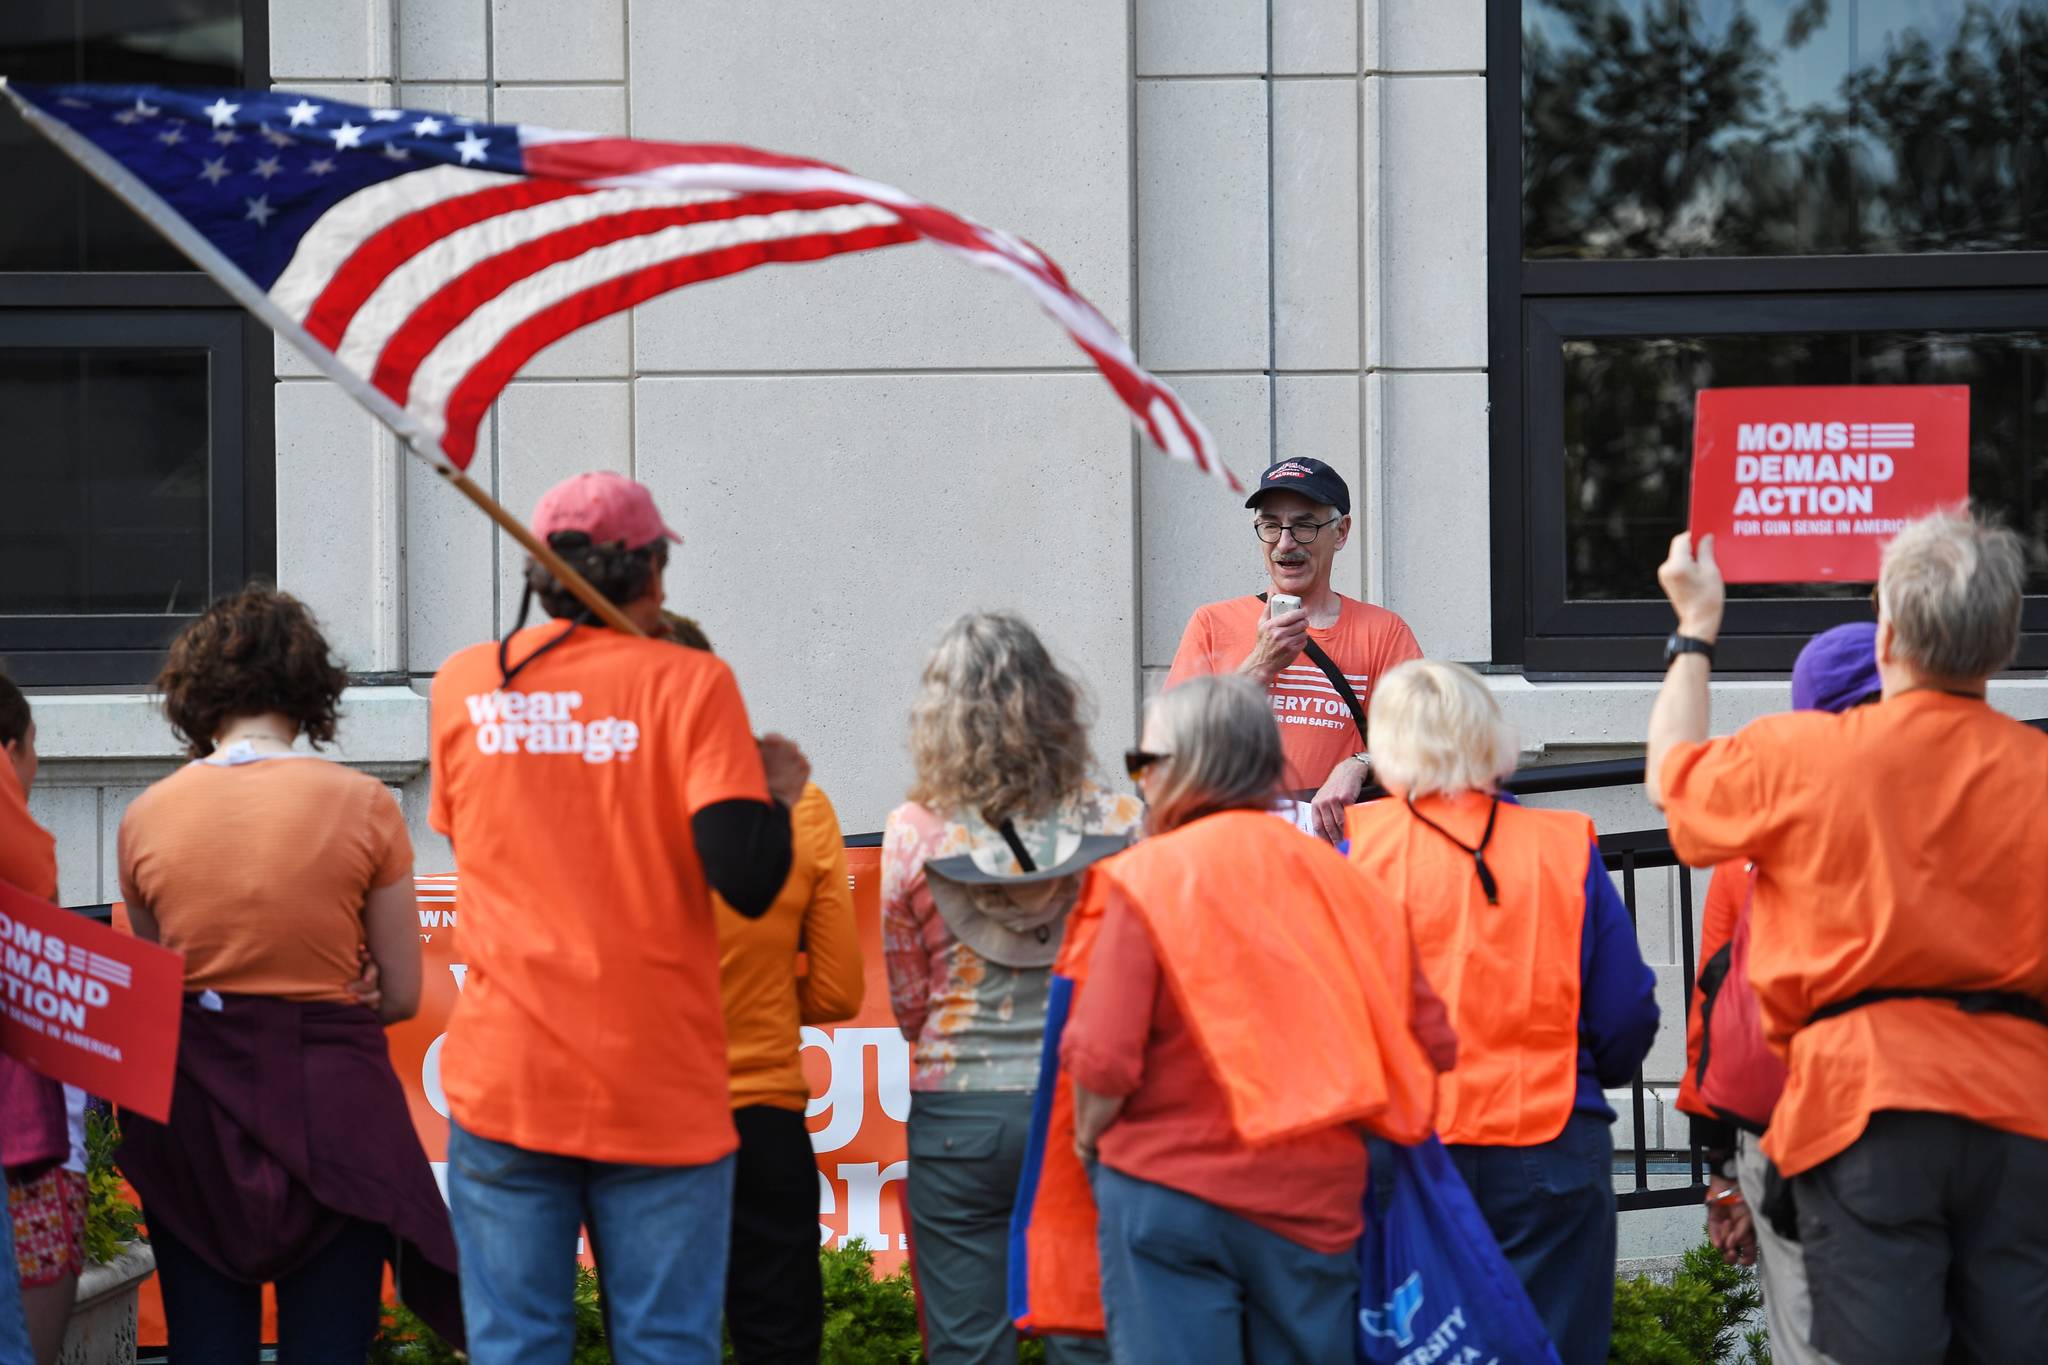 John Sonin leads a rally at the Capitol for National Gun Violence Awareness Day on Friday, June 7, 2019. (Michael Penn | Juneau Empire)